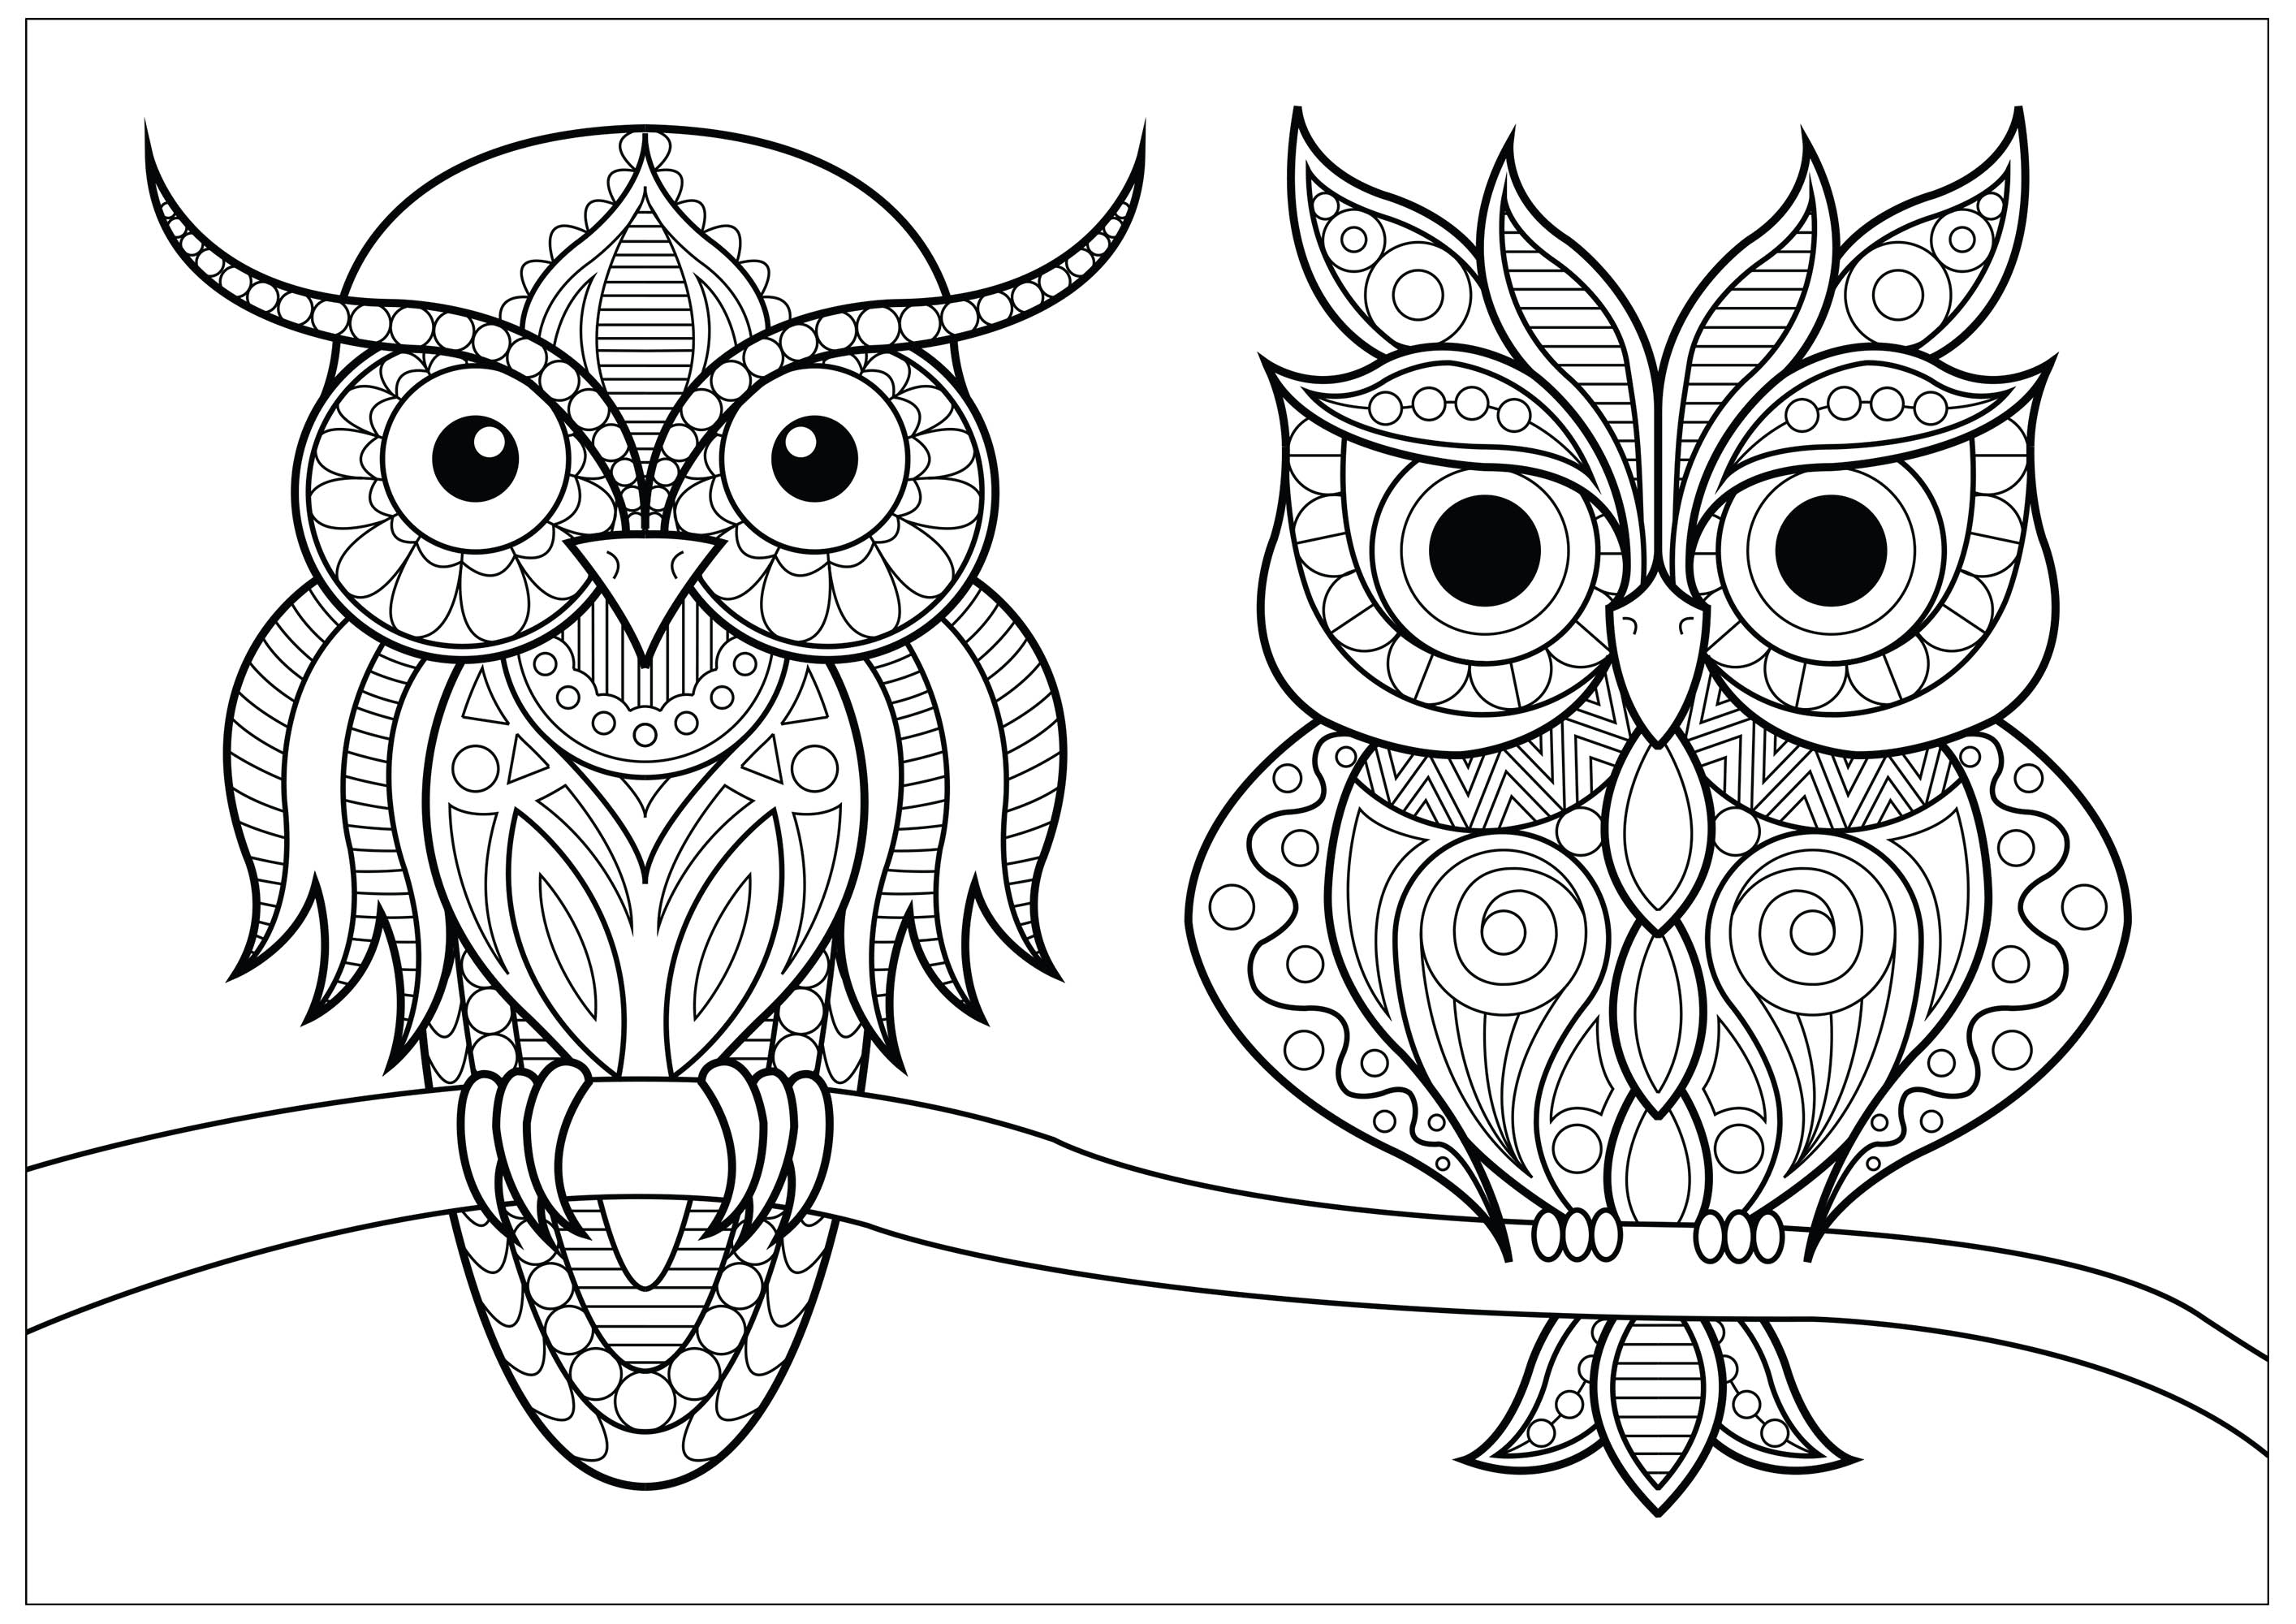 Two Owls With Simple Patterns On Branch Owls Adult Coloring Pages